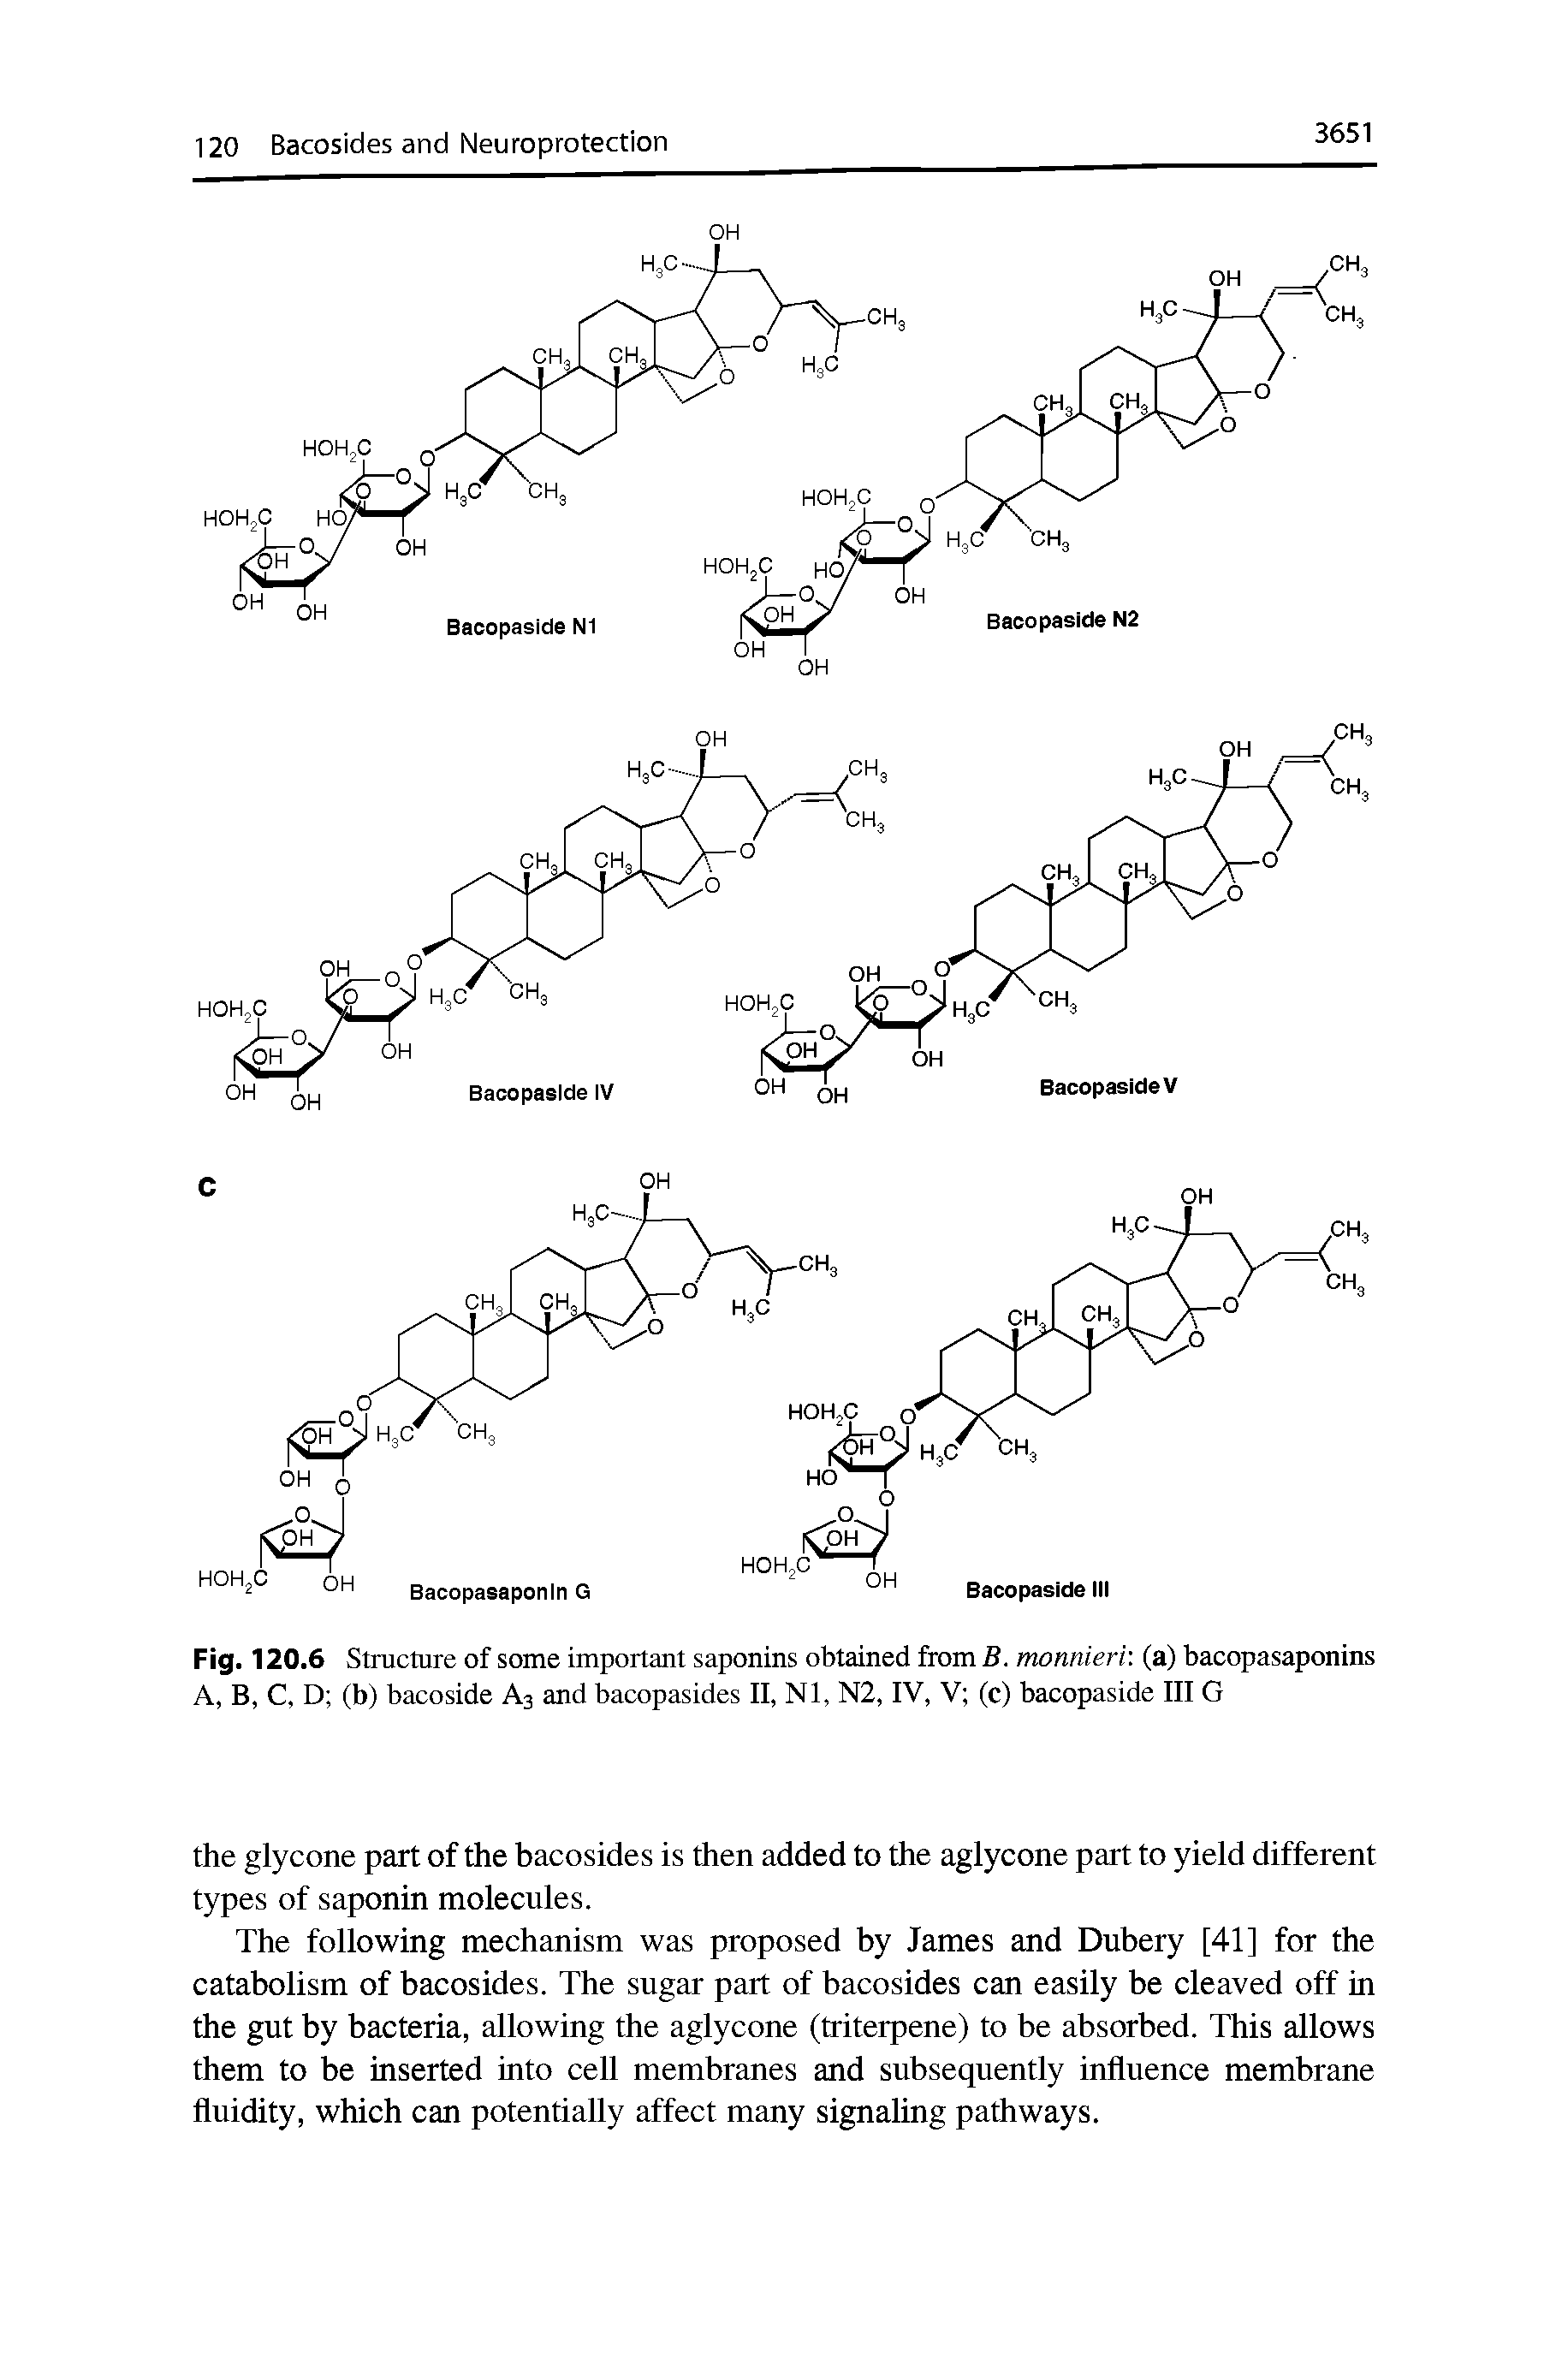 Fig. 120.6 Structure of some important saponins obtained from B. monnierv. (a) bacopasaponins A, B, C, D (b) bacoside A3 and bacopasides II, Nl, N2, IV, V (c) bacopaside III G...